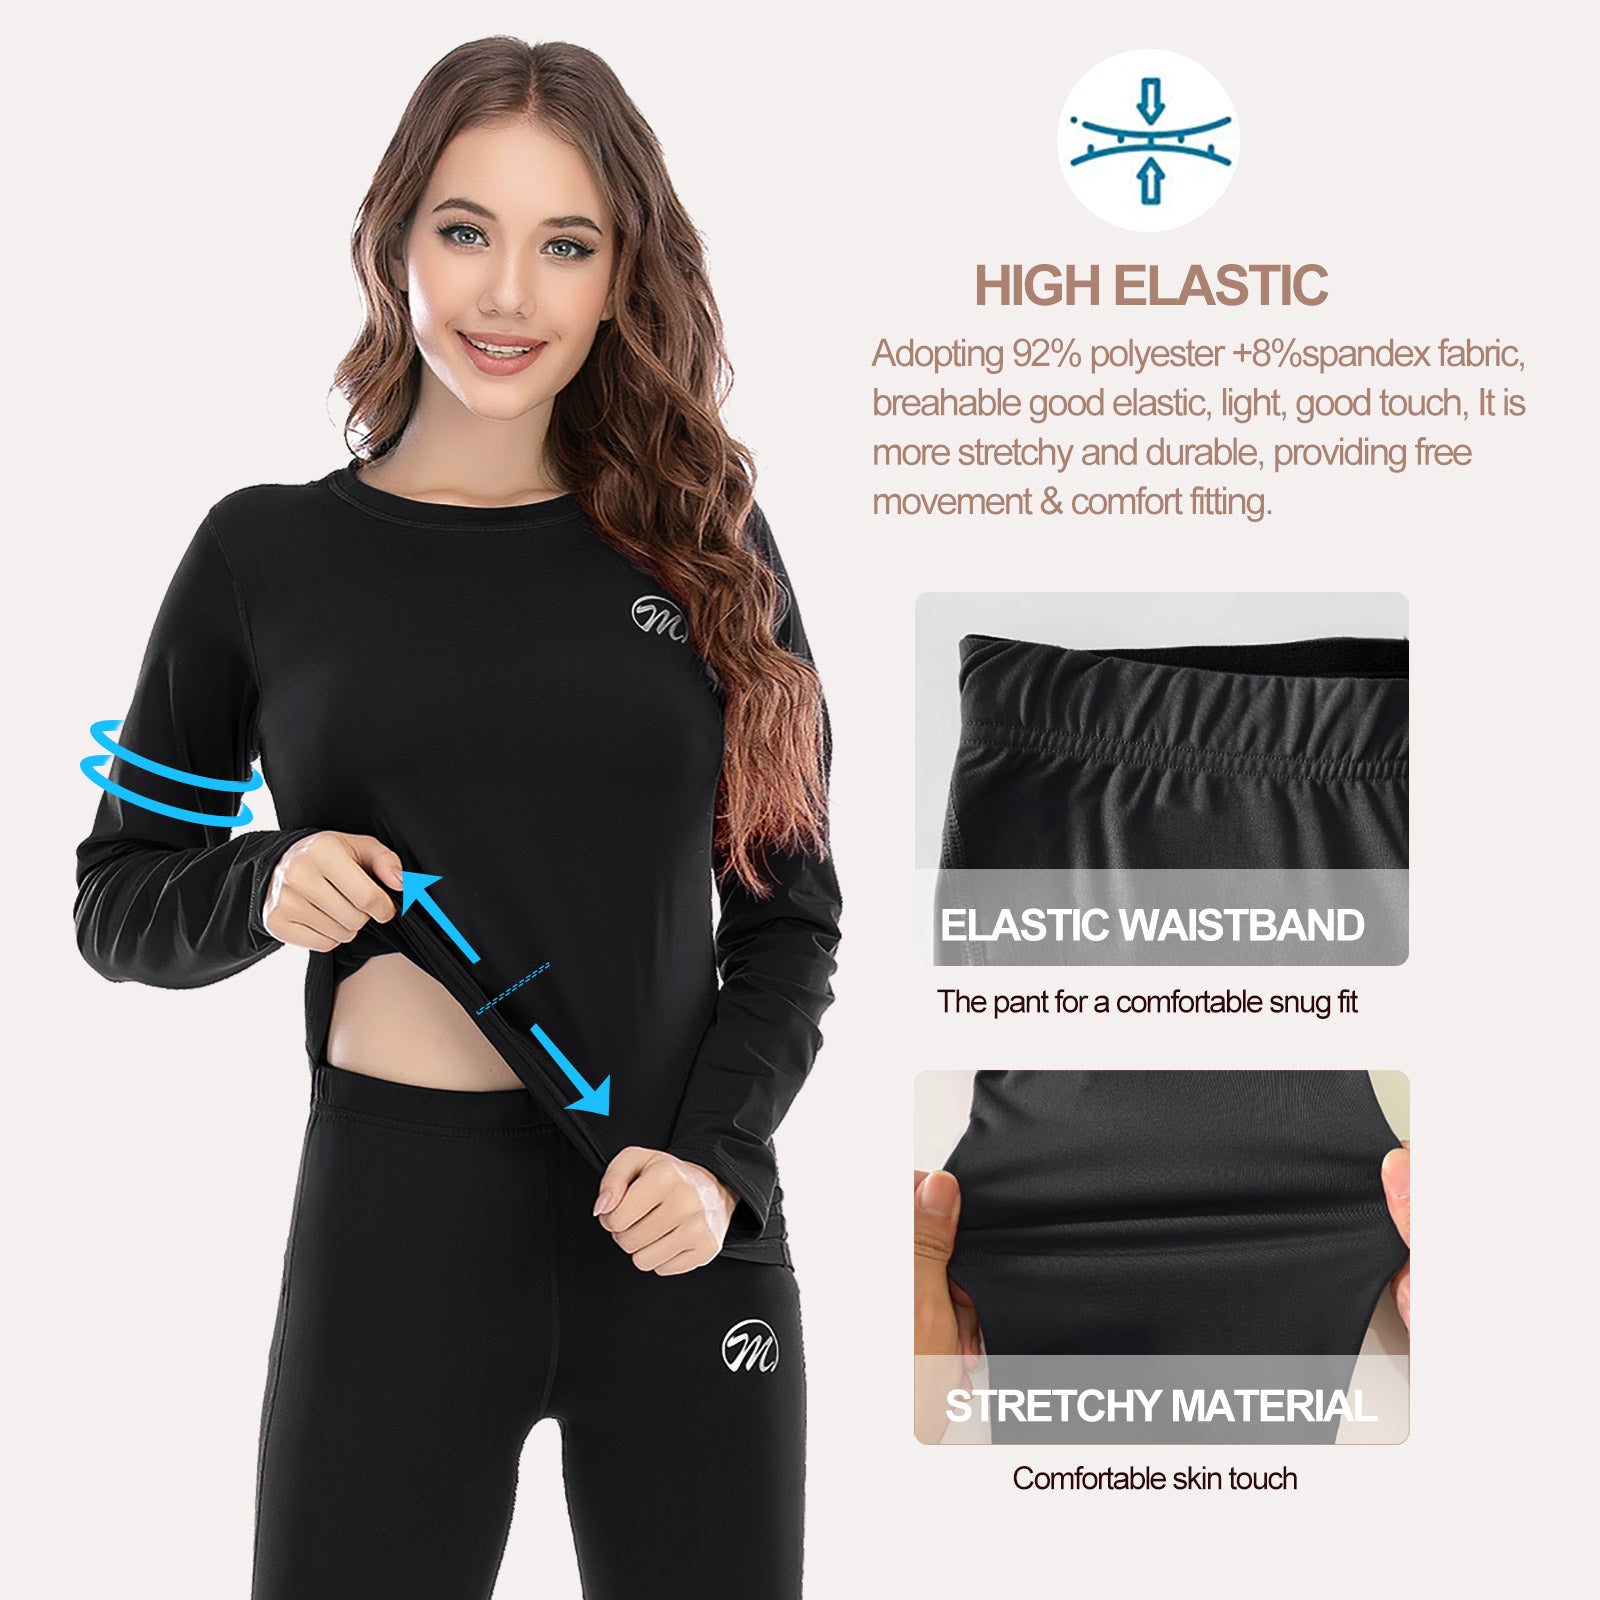 Winter Warm Base Layer Top & Bottom Set for Women, Long Sleeves